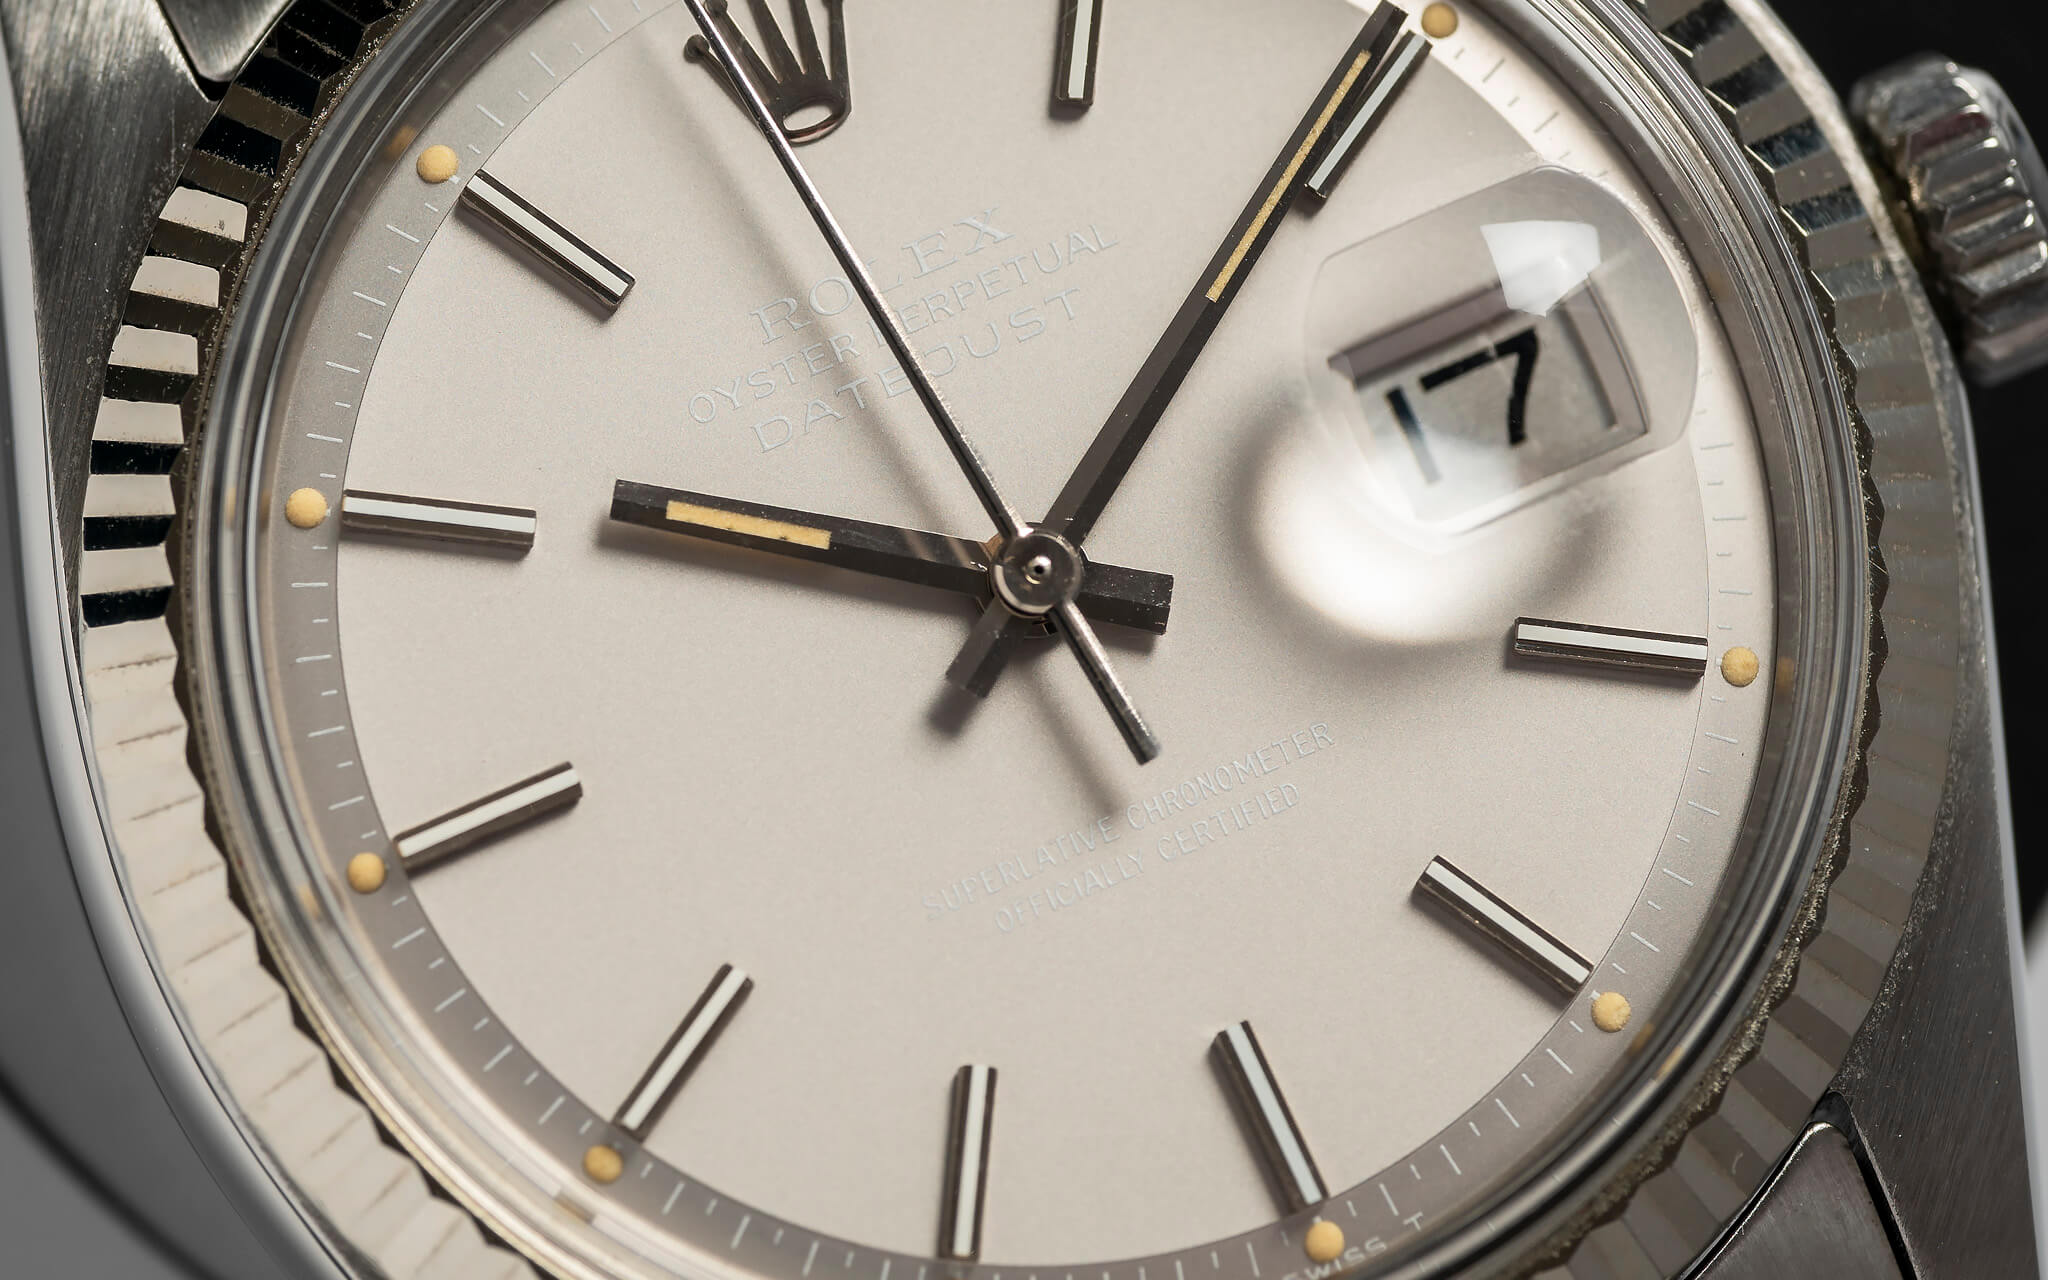 1601 Datejust ‘Ghost dial’